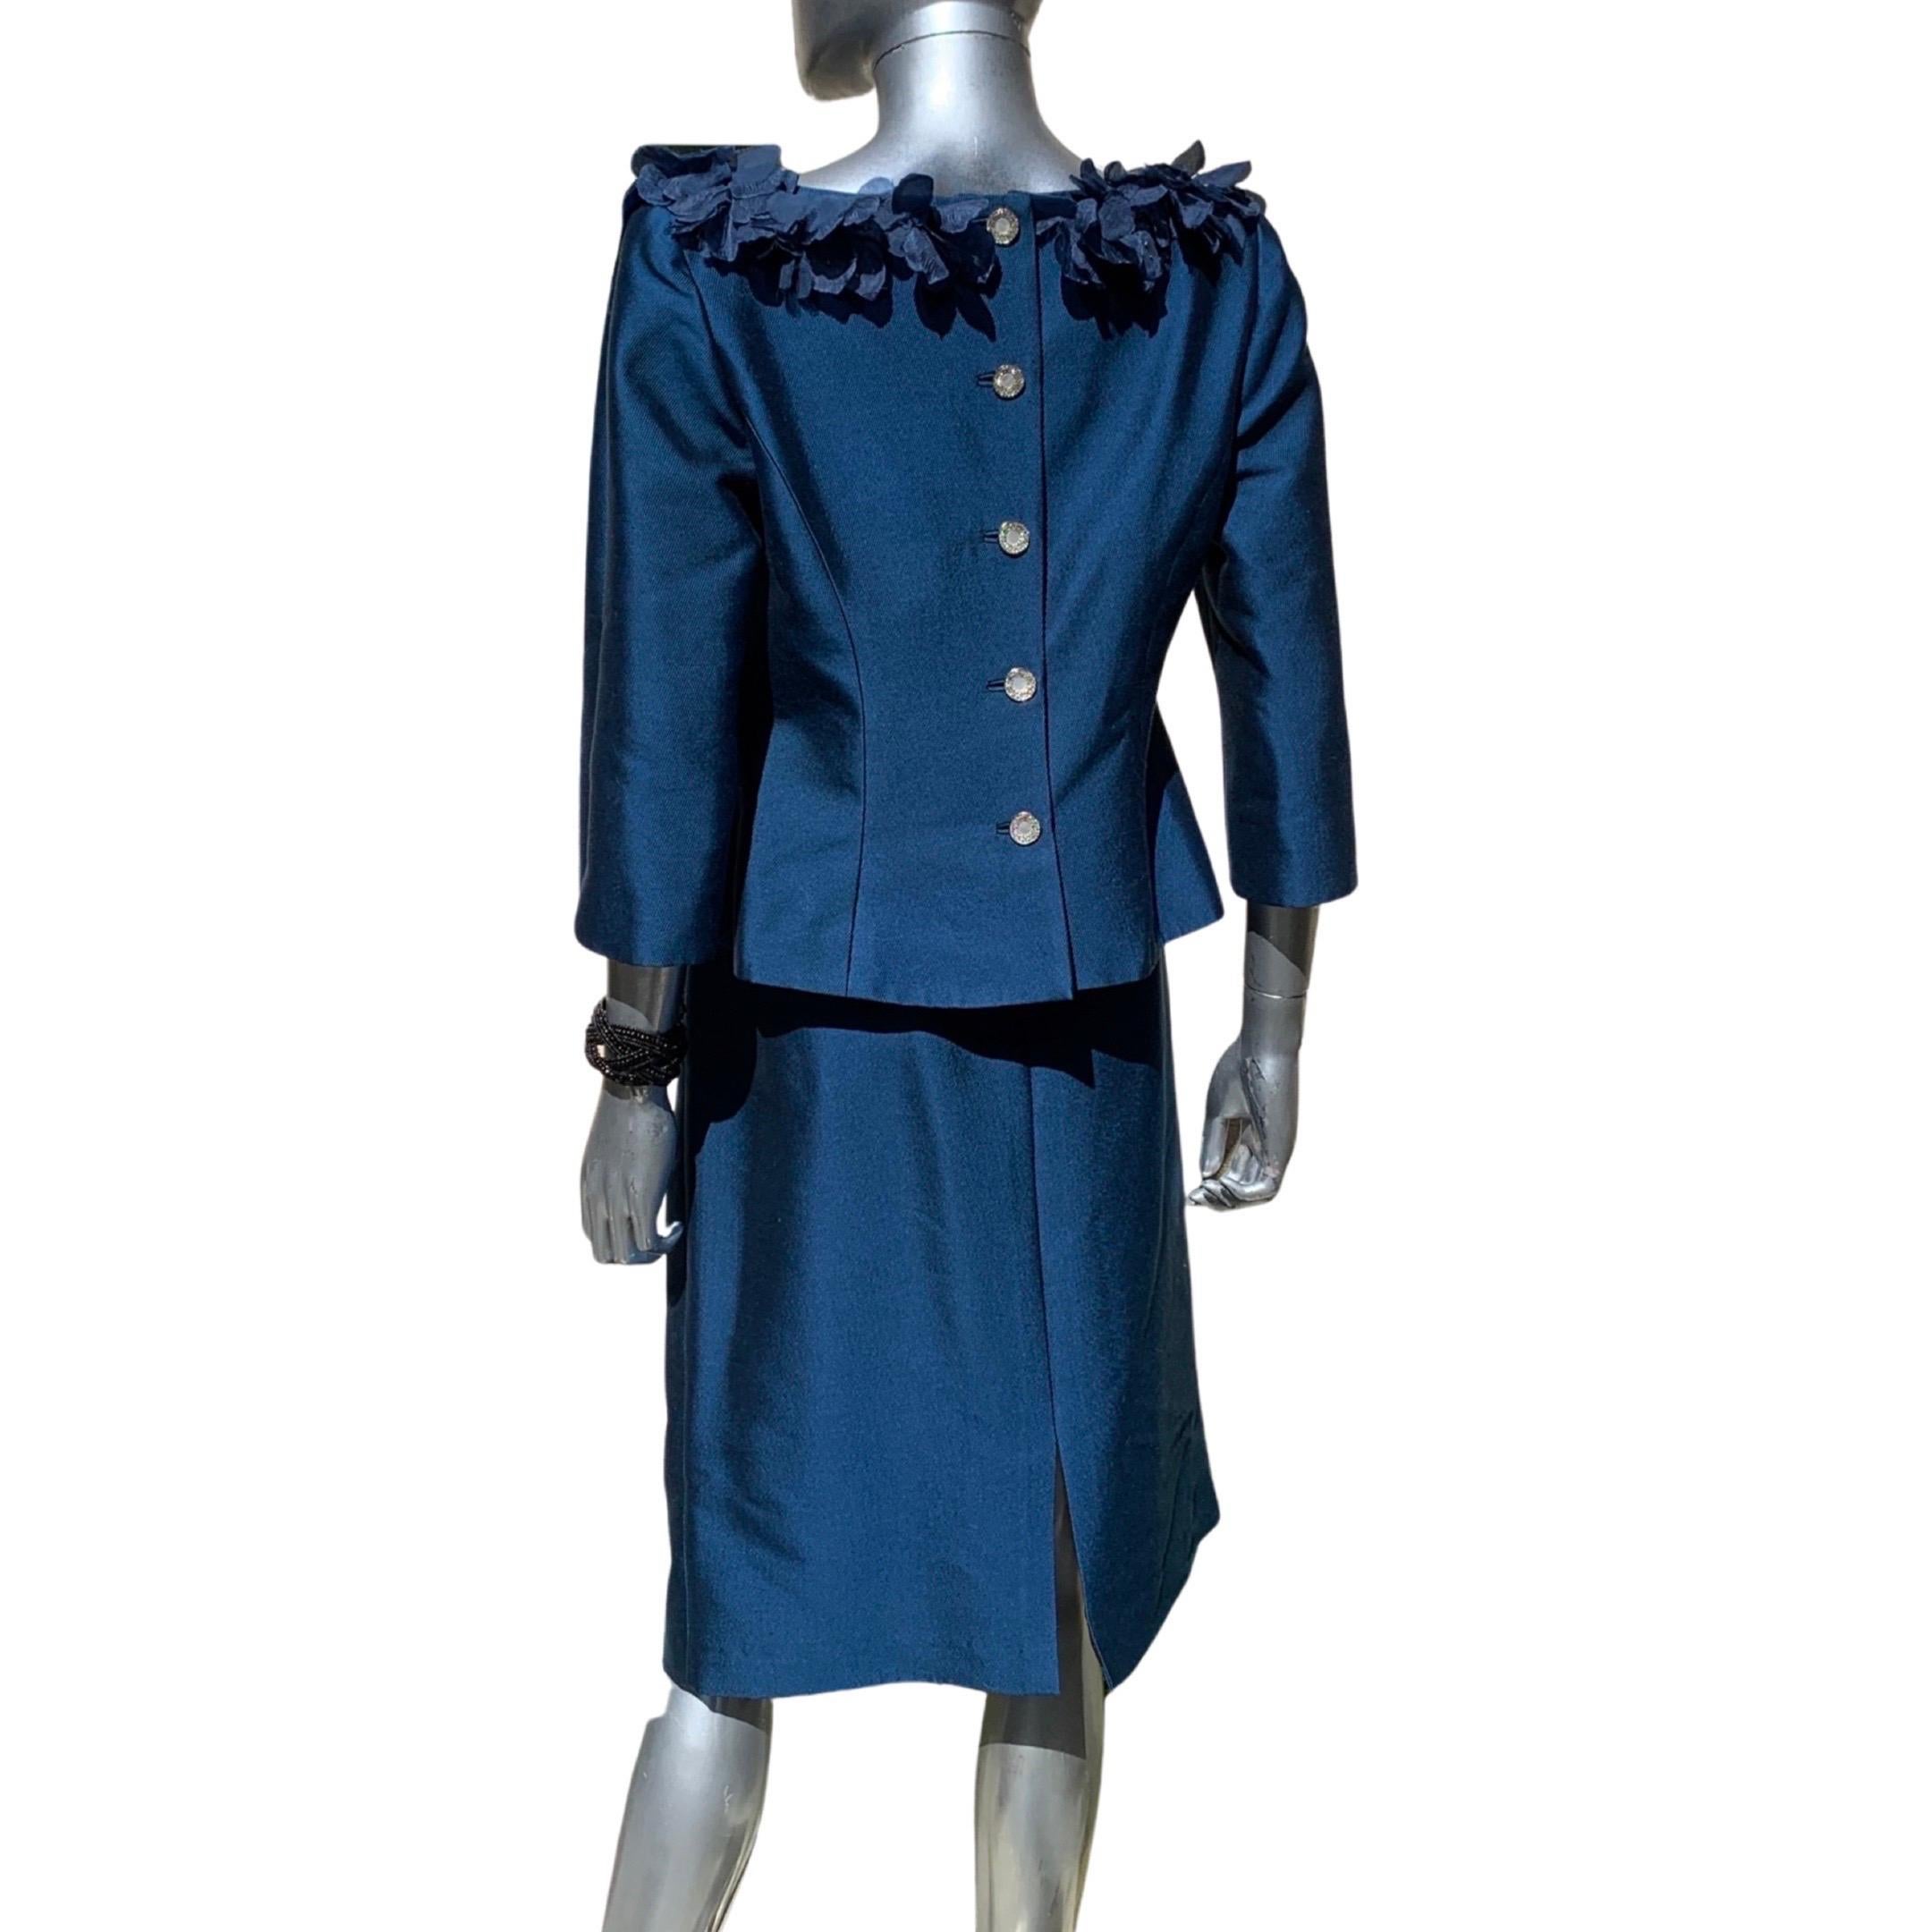 Three Piece Saphire Blue Couture Evening Ensemble by Lily Samii SF Size 8 For Sale 7